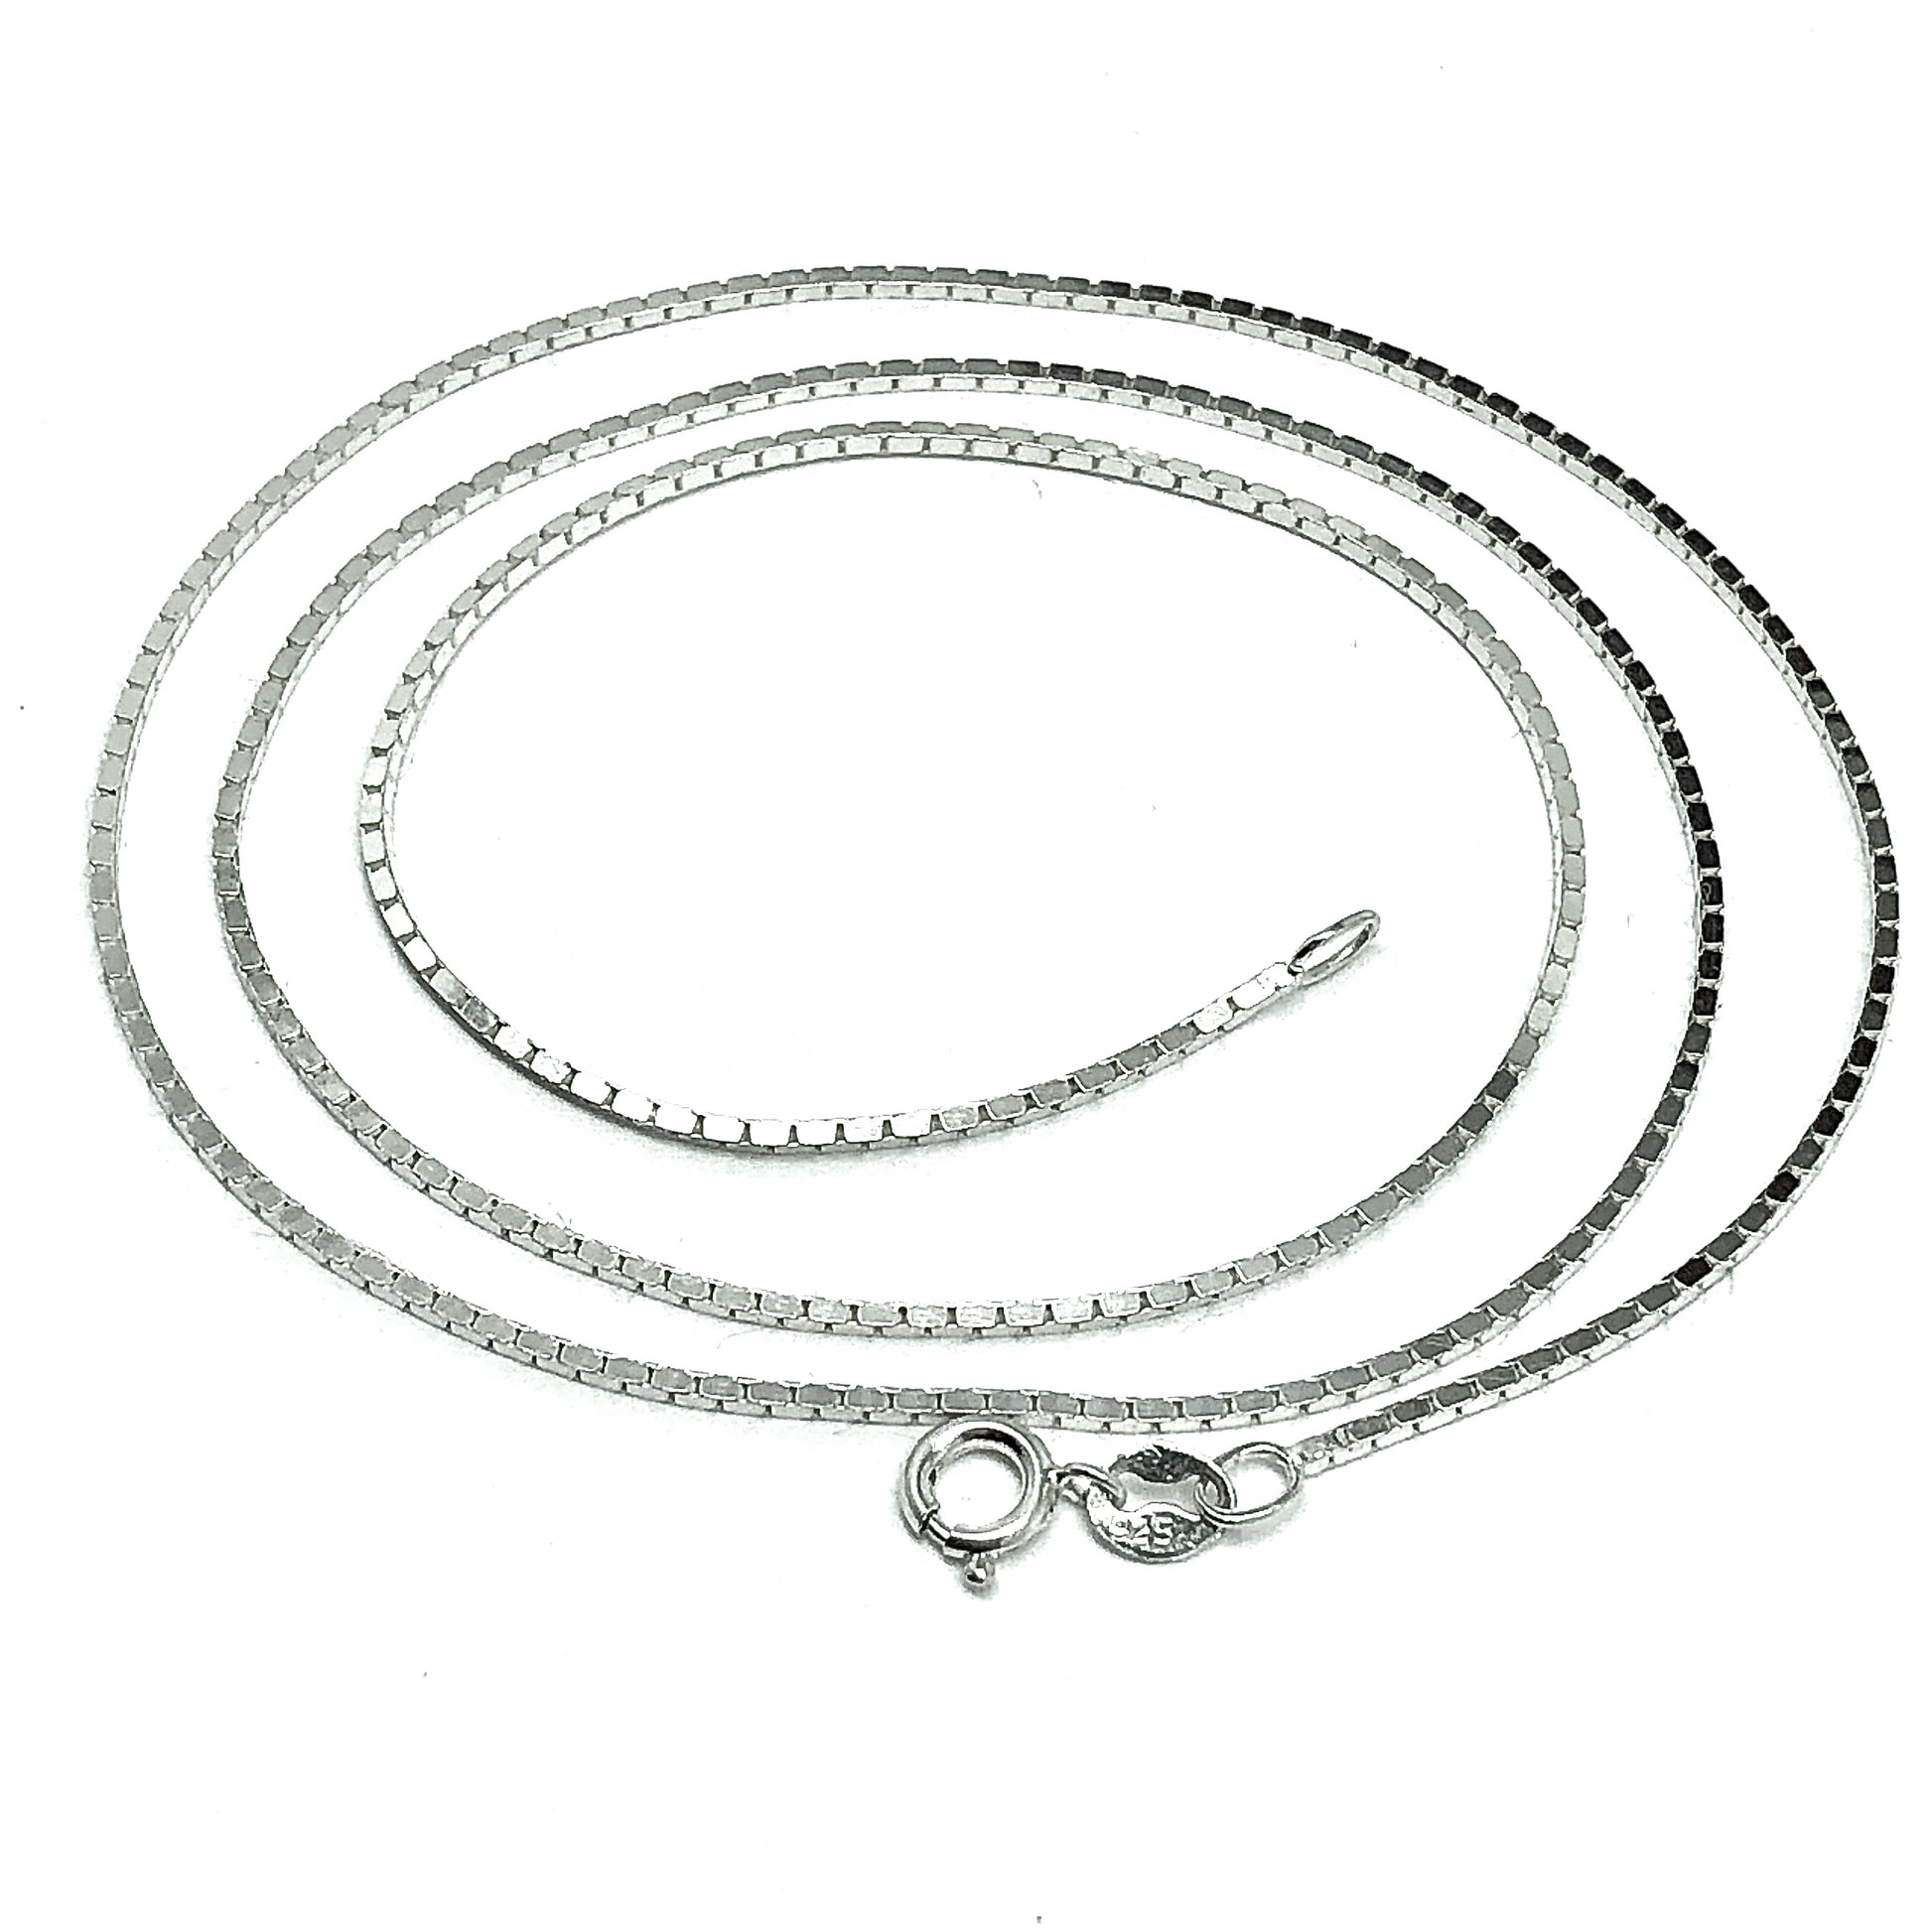 Necklace | Womens Luscious 18" Sterling Silver 1mm Sleek Italian Box Chain Necklace - Blingschlingers Jewelry